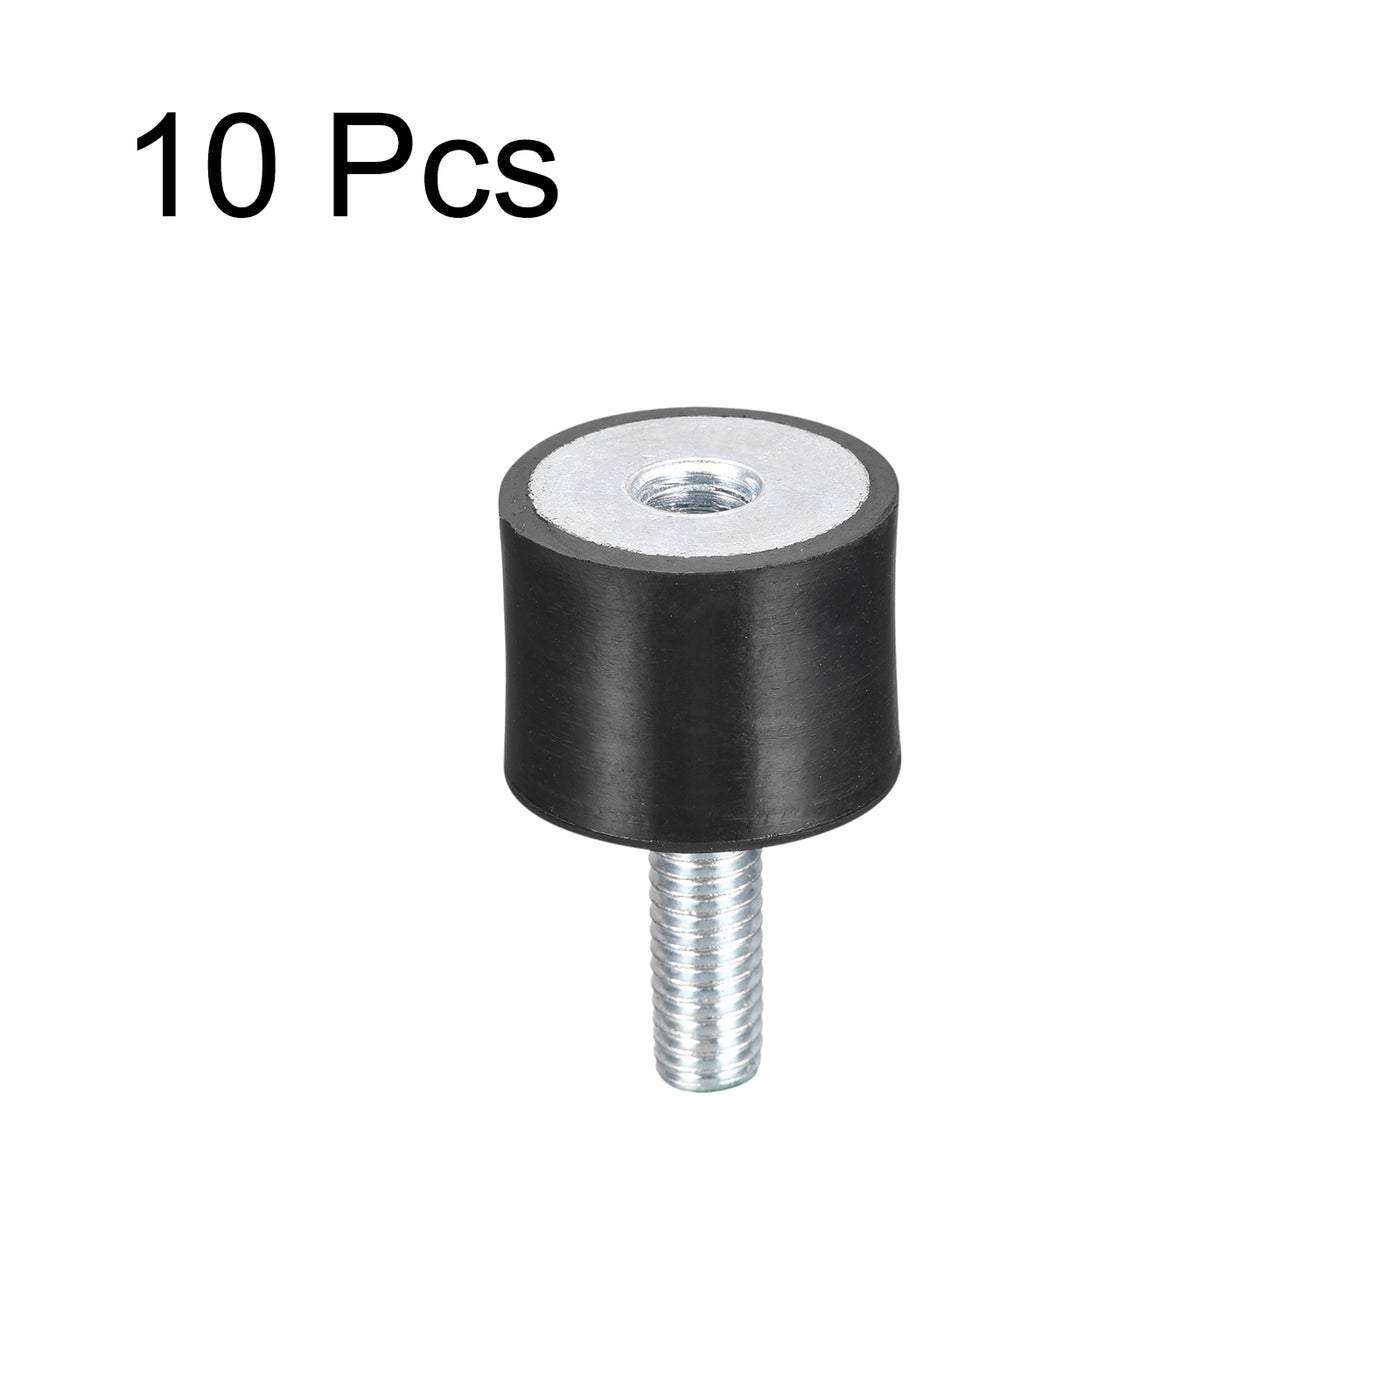 uxcell Uxcell Rubber Mount 10pcs M6 Male/Female Vibration Isolator Shock Absorber D20mmxH15mm